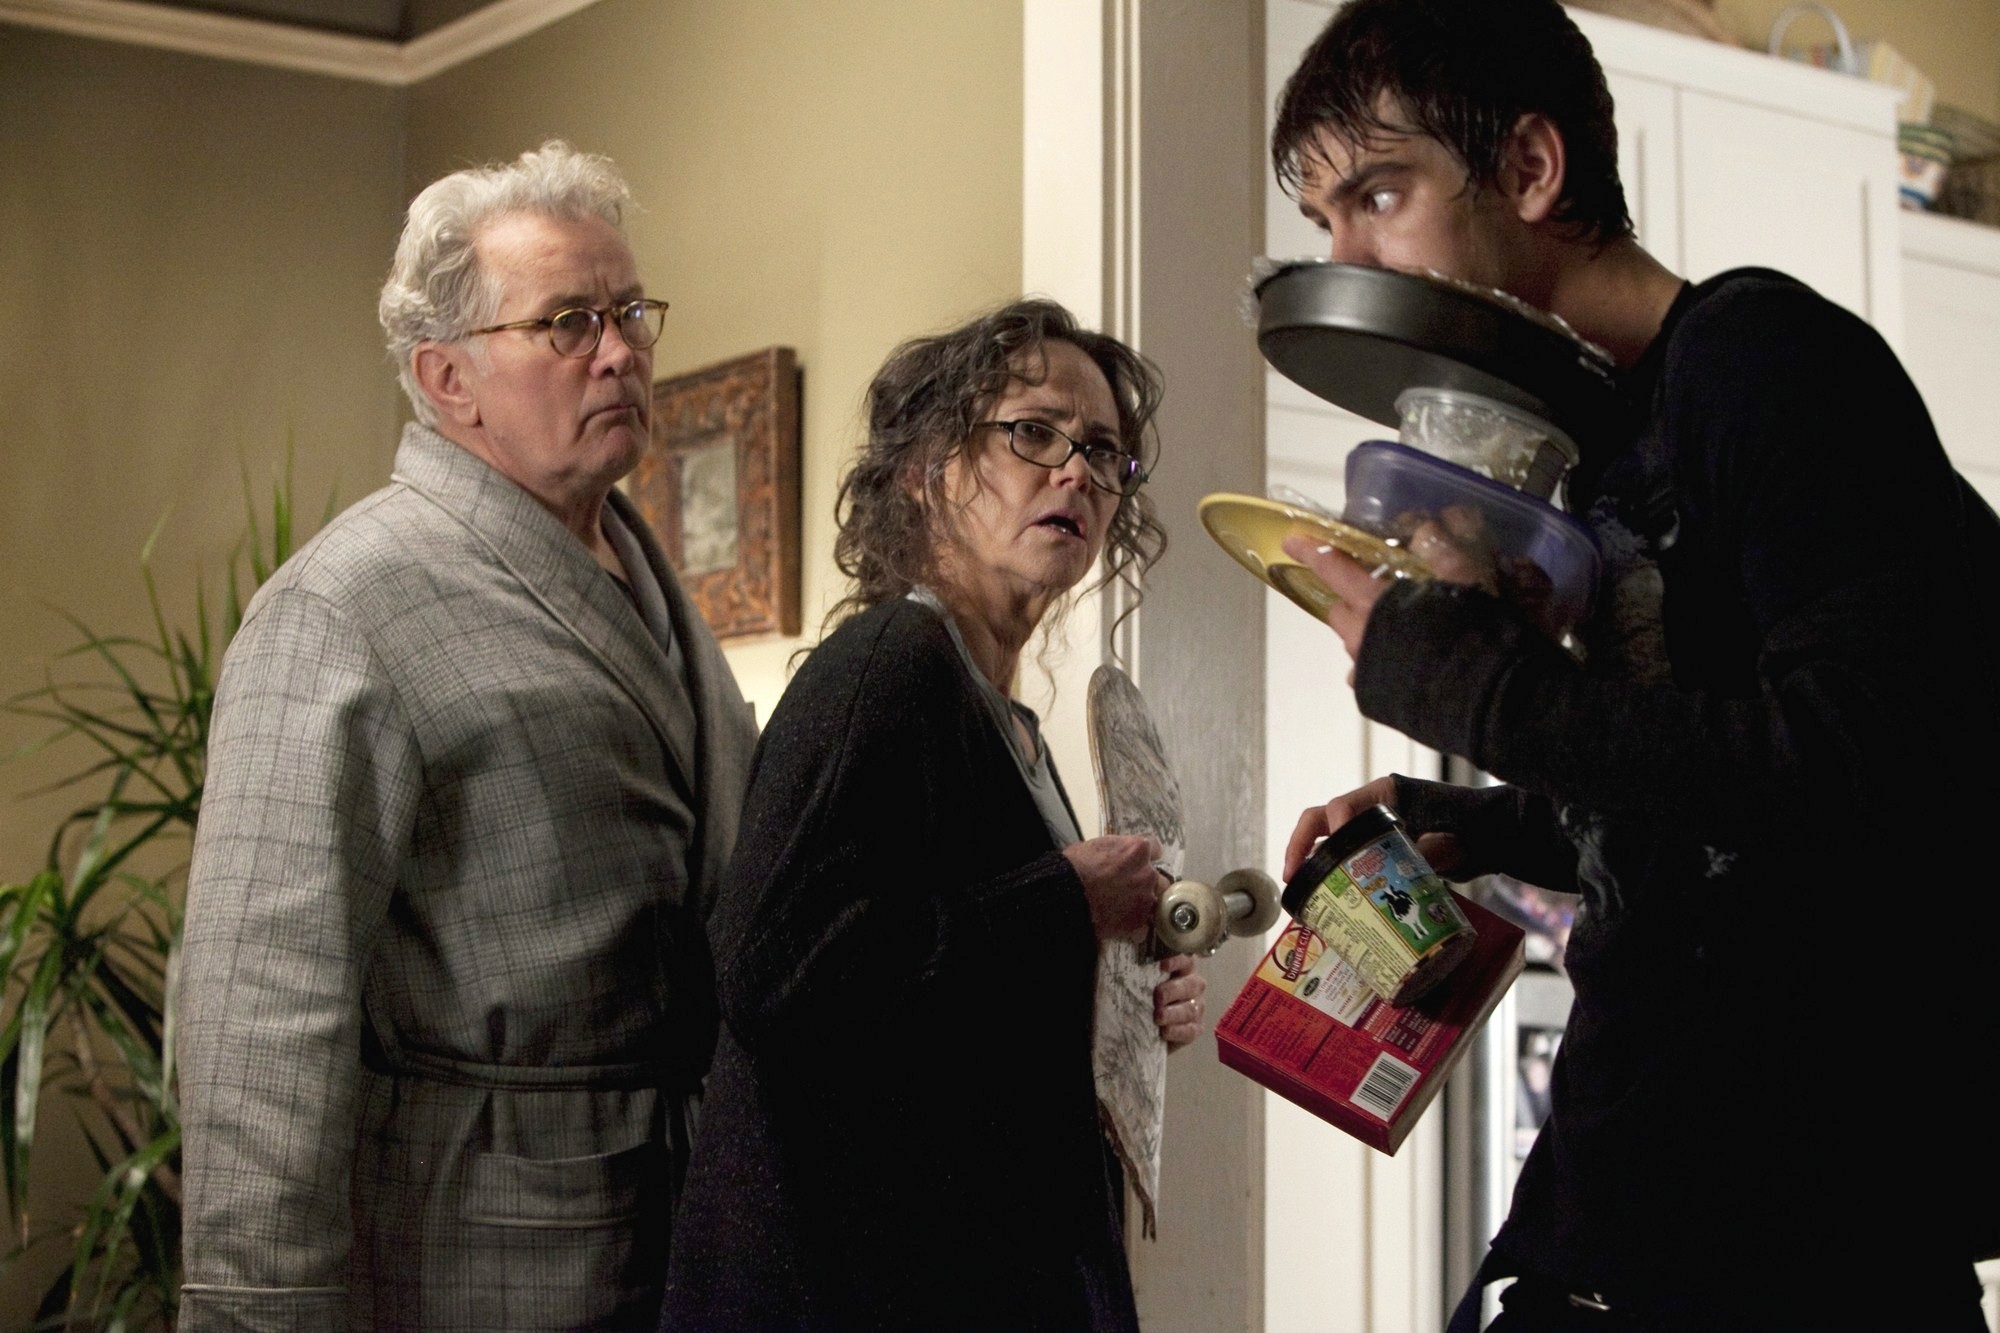 Martin Sheen, Sally Field and Andrew Garfield in Columbia Pictures' The Amazing Spider-Man (2012)